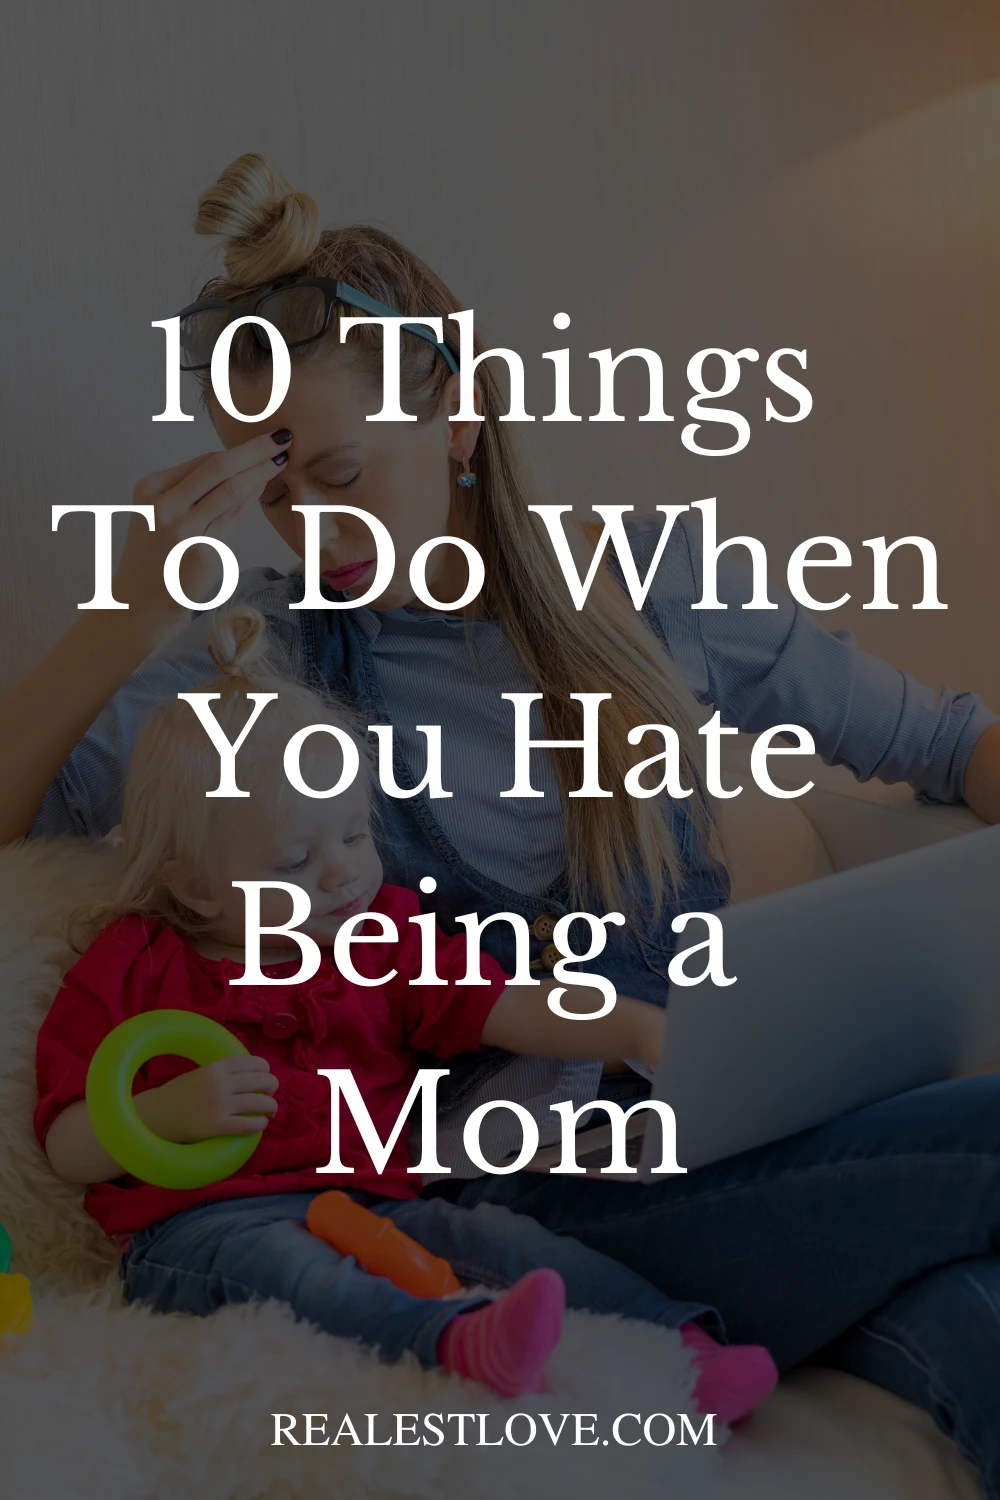 'I Hate Being a Mom